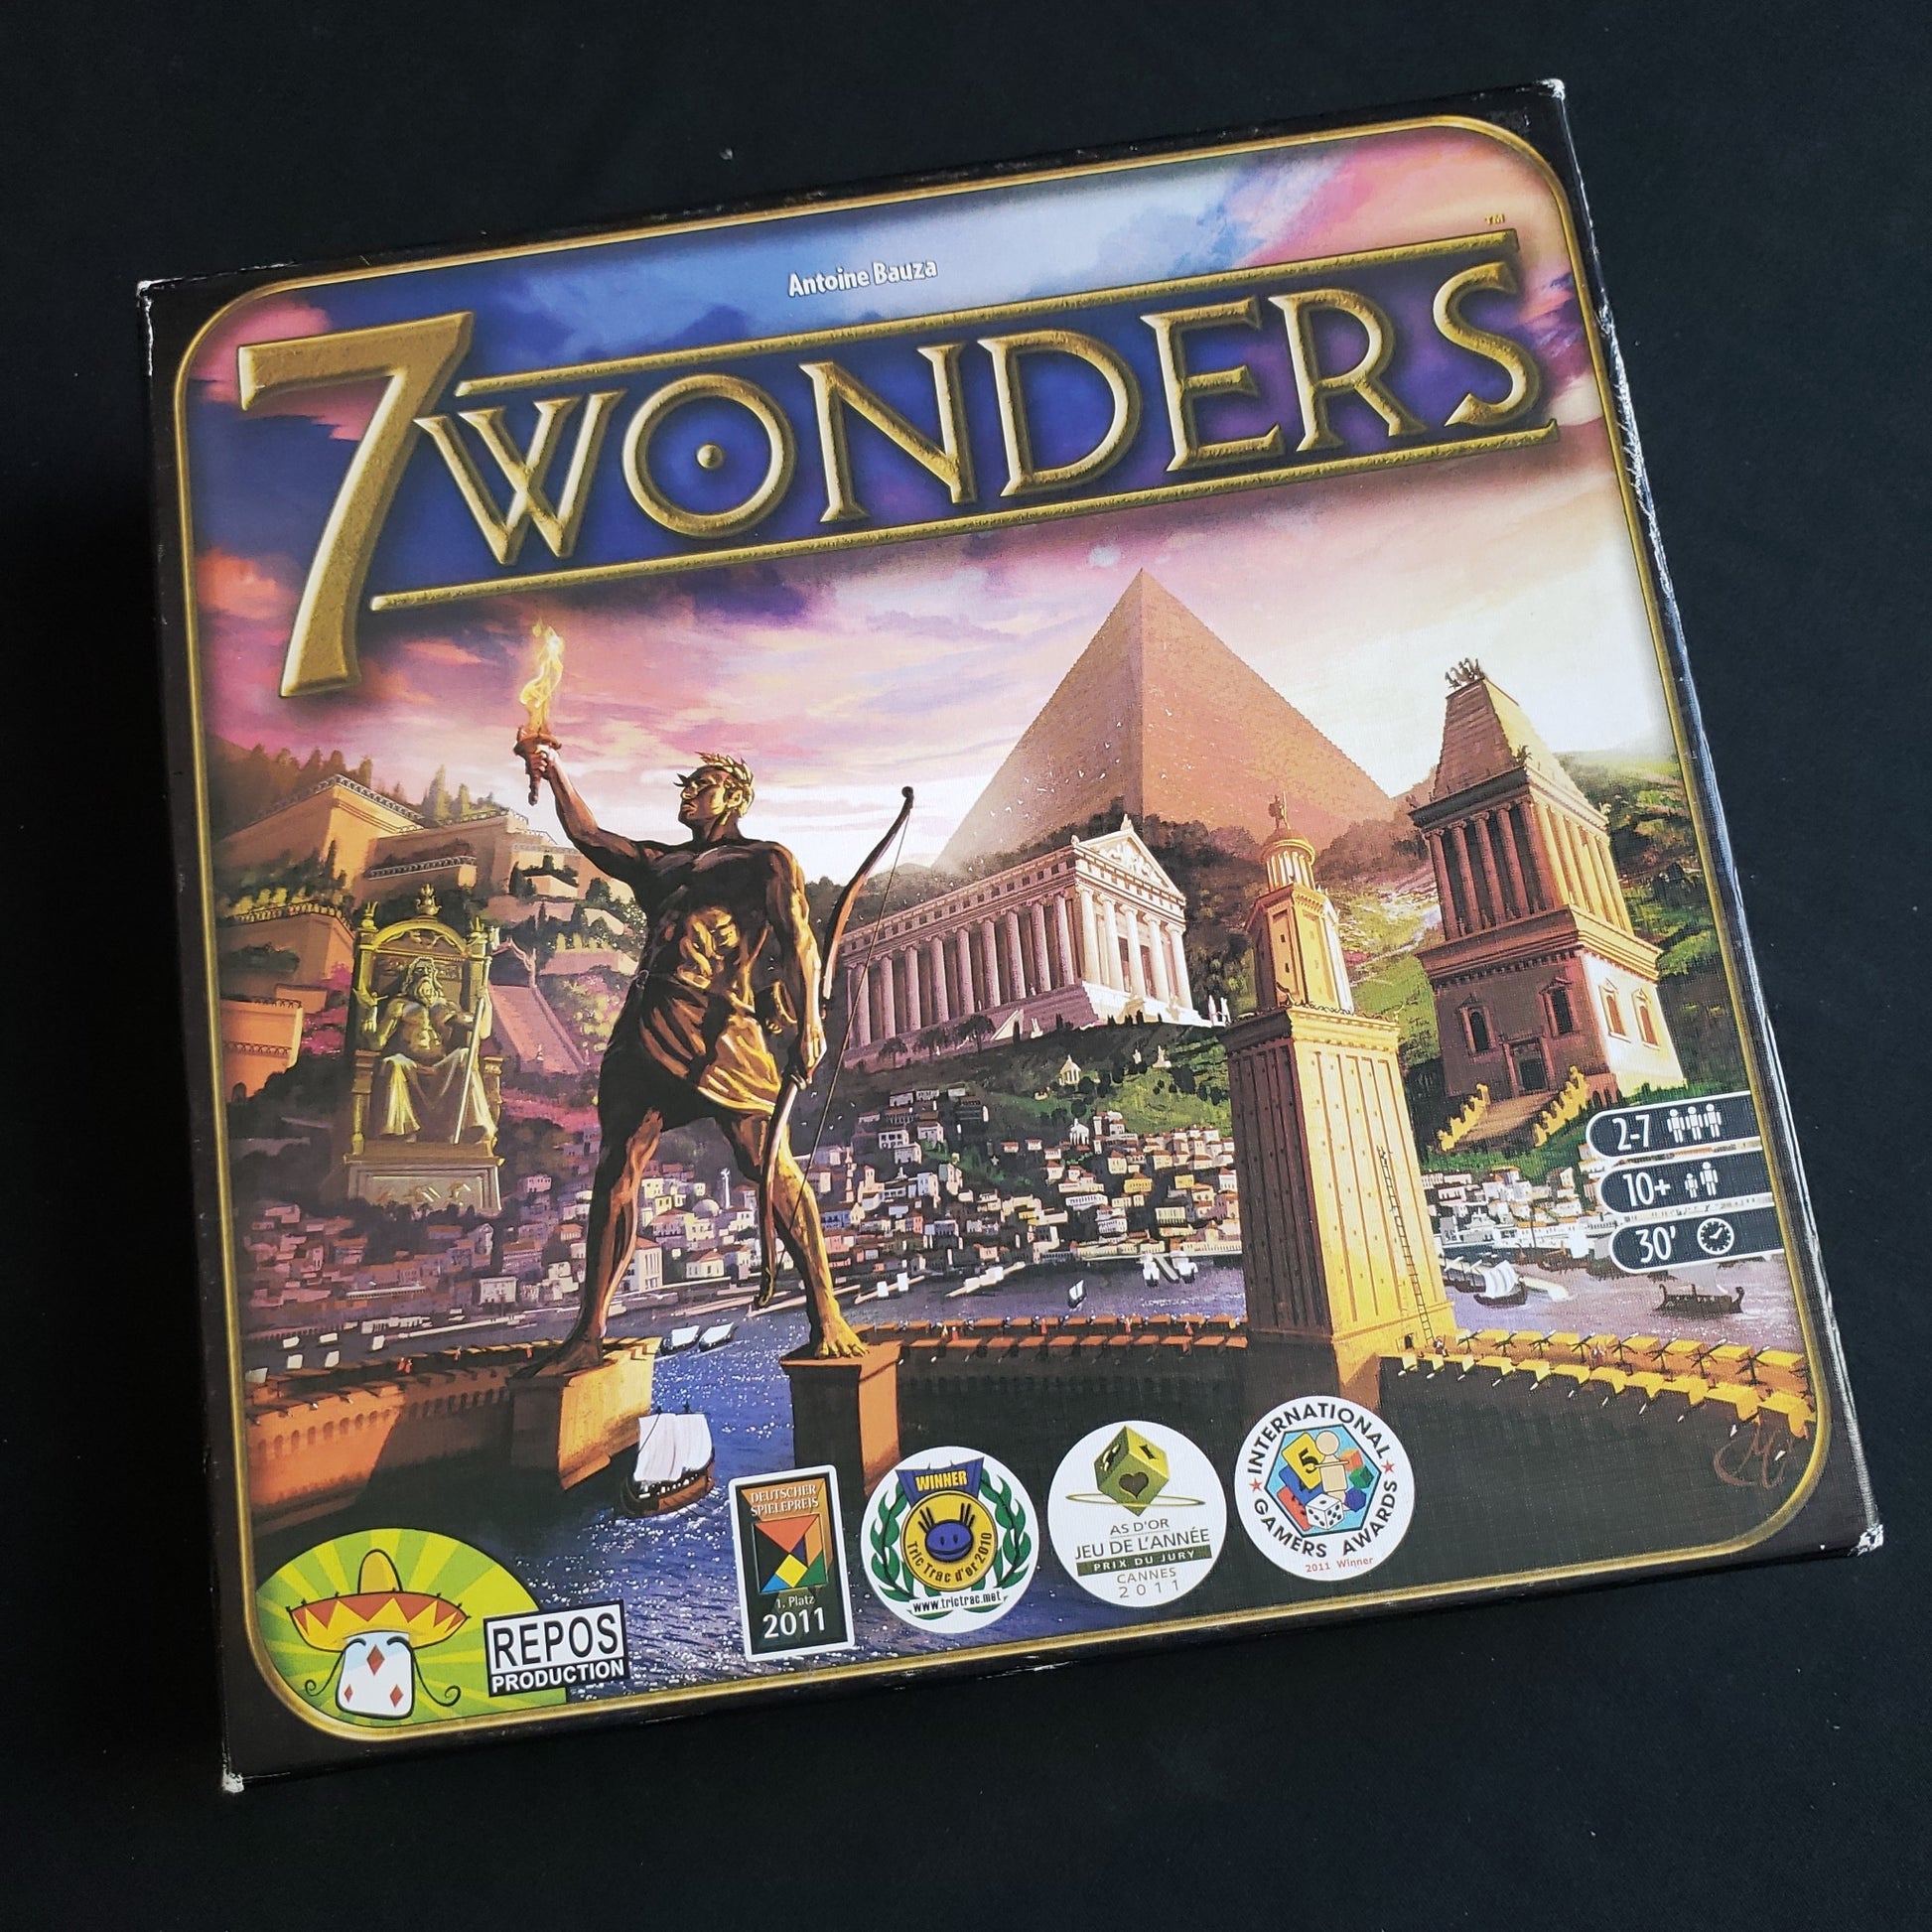 Image shows the front cover of the box of the 7 Wonders board game